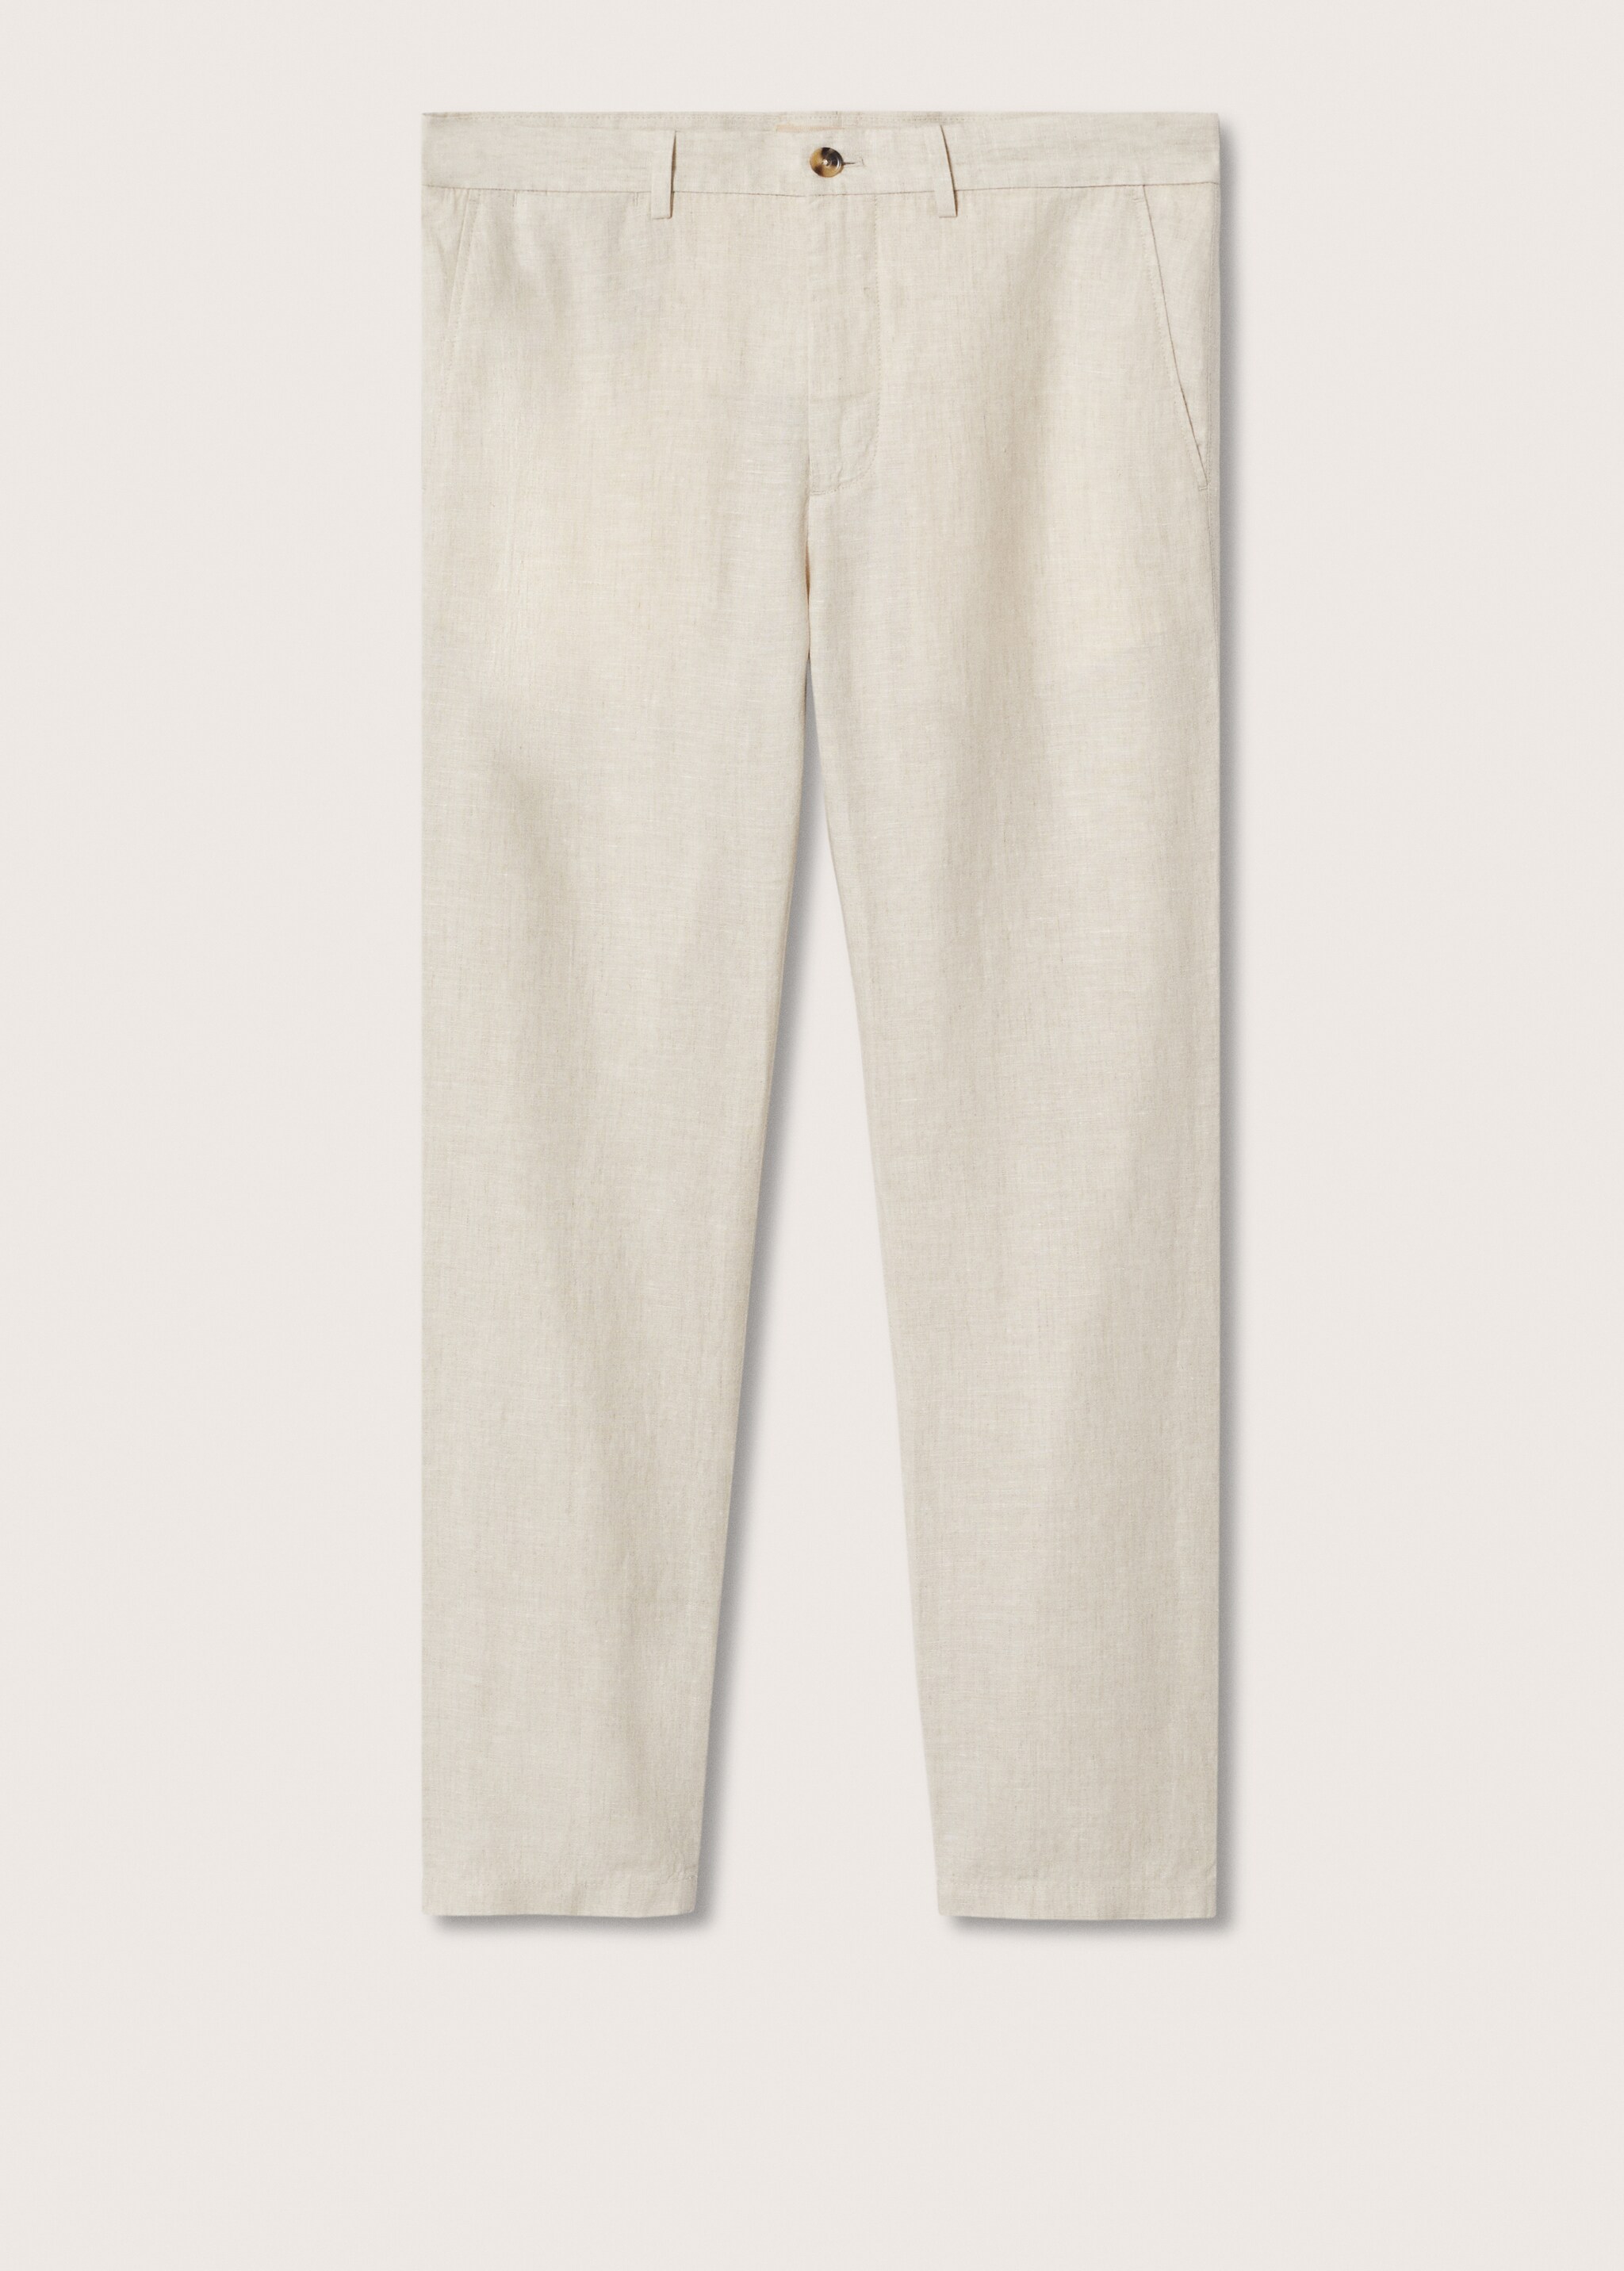 Slim fit linen trousers - Article without model